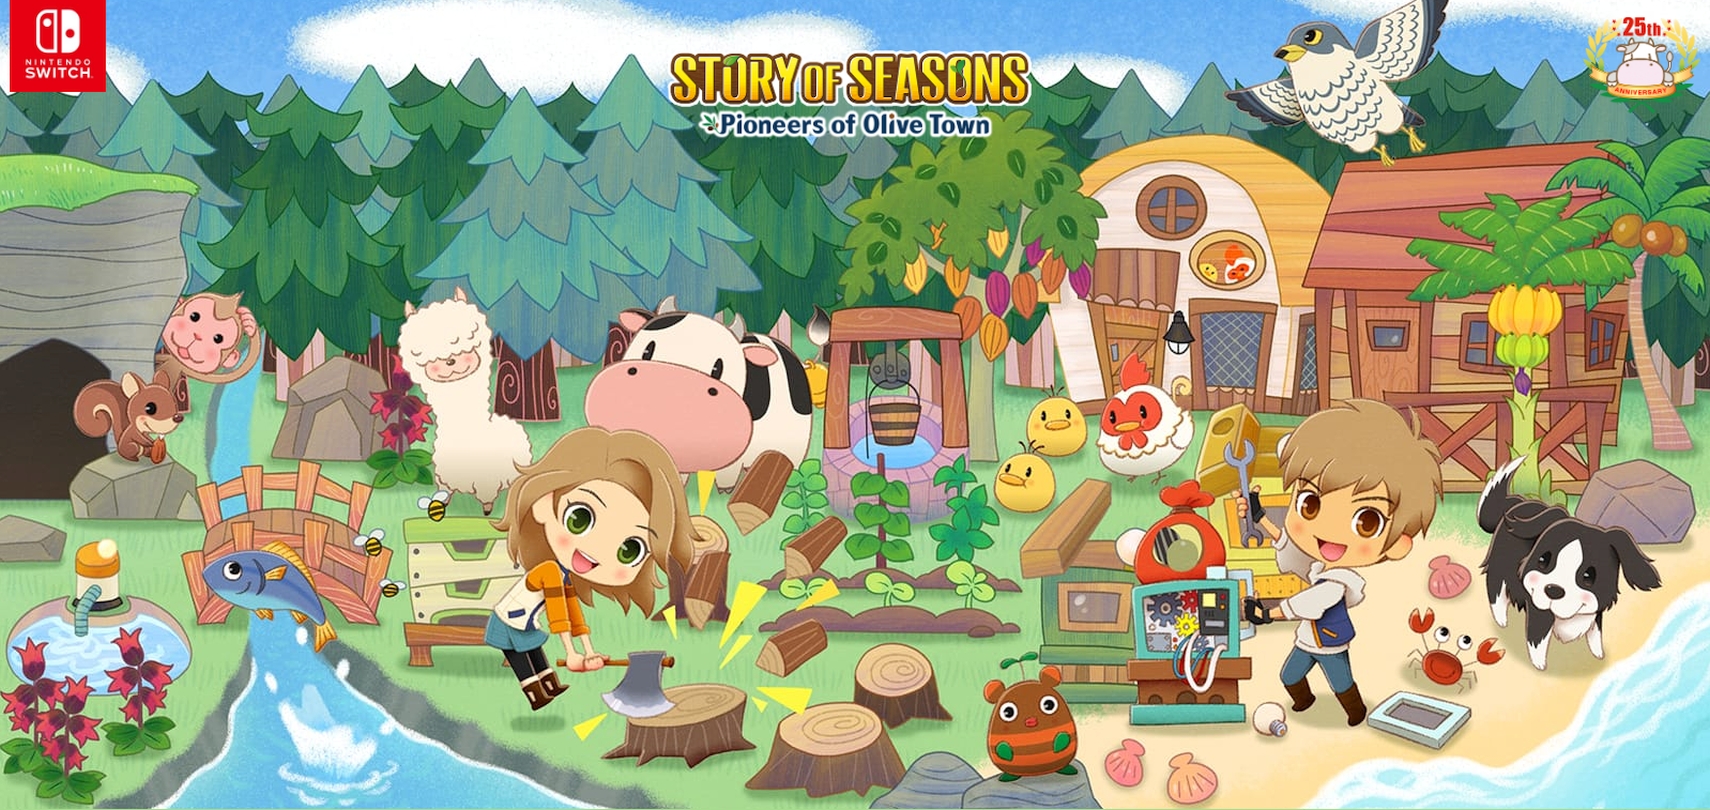 Story of Seasons: Pioneers of Olive Town Premium Edition Announced